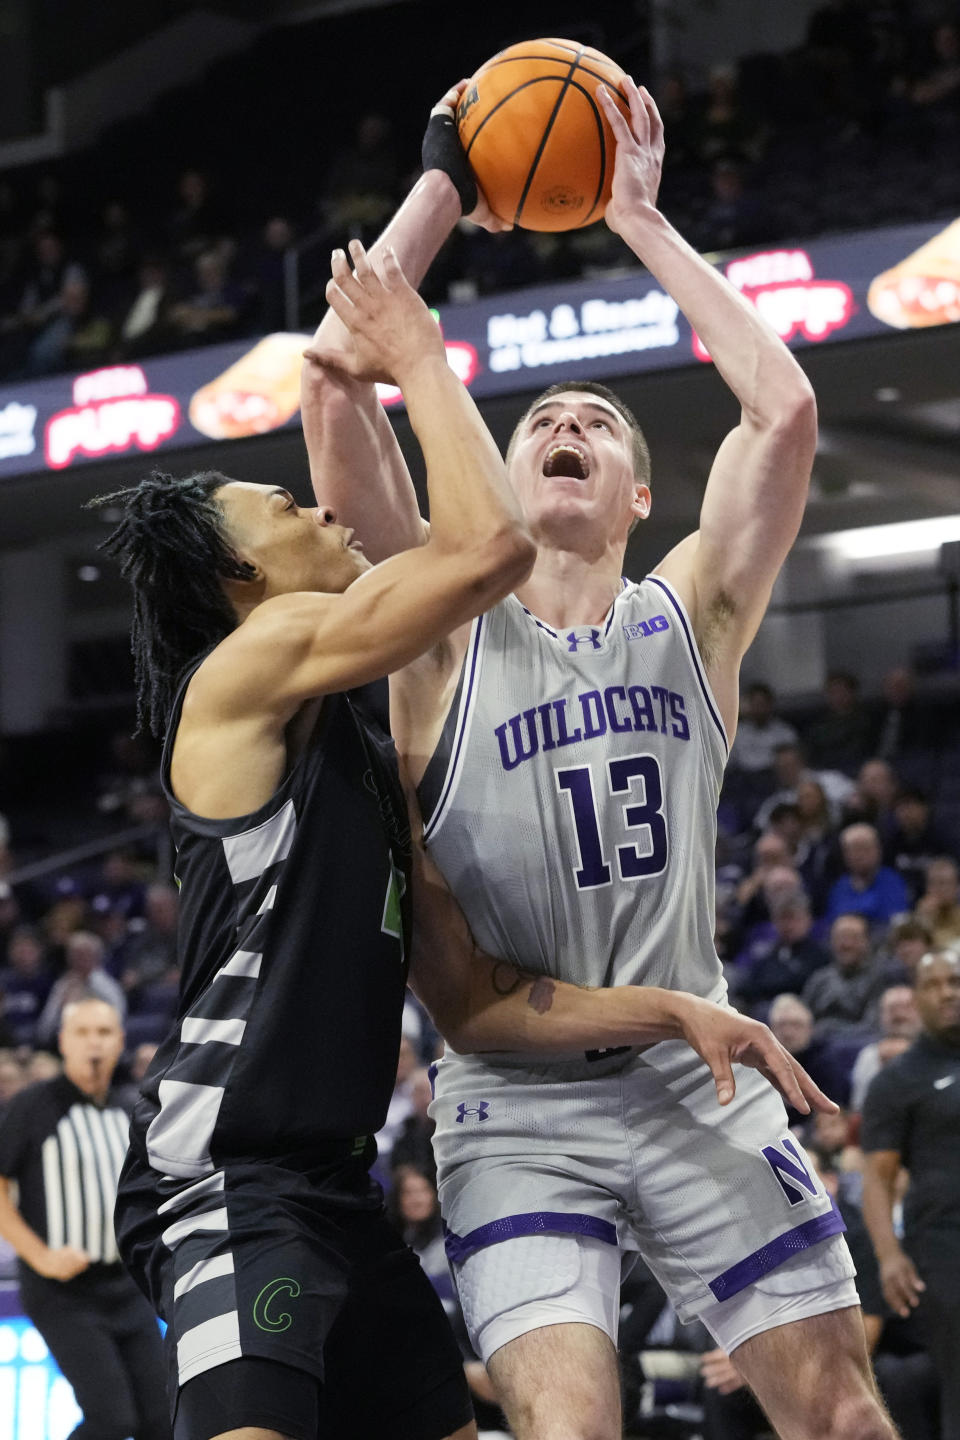 Northwestern guard Brooks Barnhizer (13) shoots against Chicago State forward Noble Crawford during the first half of an NCAA college basketball game in Evanston, Ill., Wednesday, Dec. 13, 2023. (AP Photo/Nam Y. Huh)